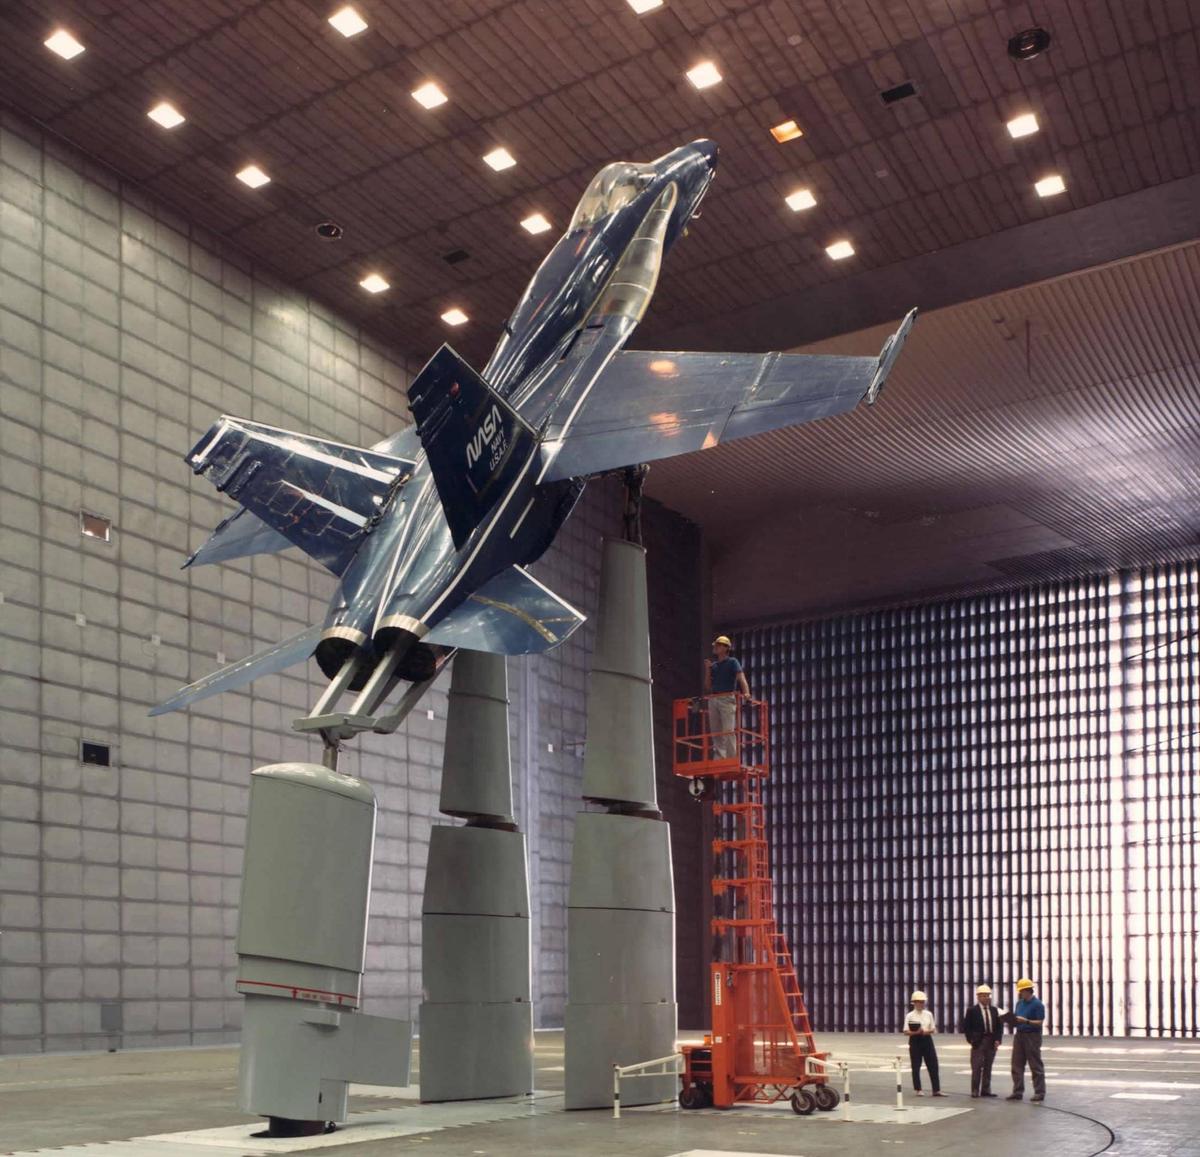 An F/A-18 Hornet fighter jet undergoing high angle of attack testing in a wind tunnel. CREDIT: www.nasa.gov